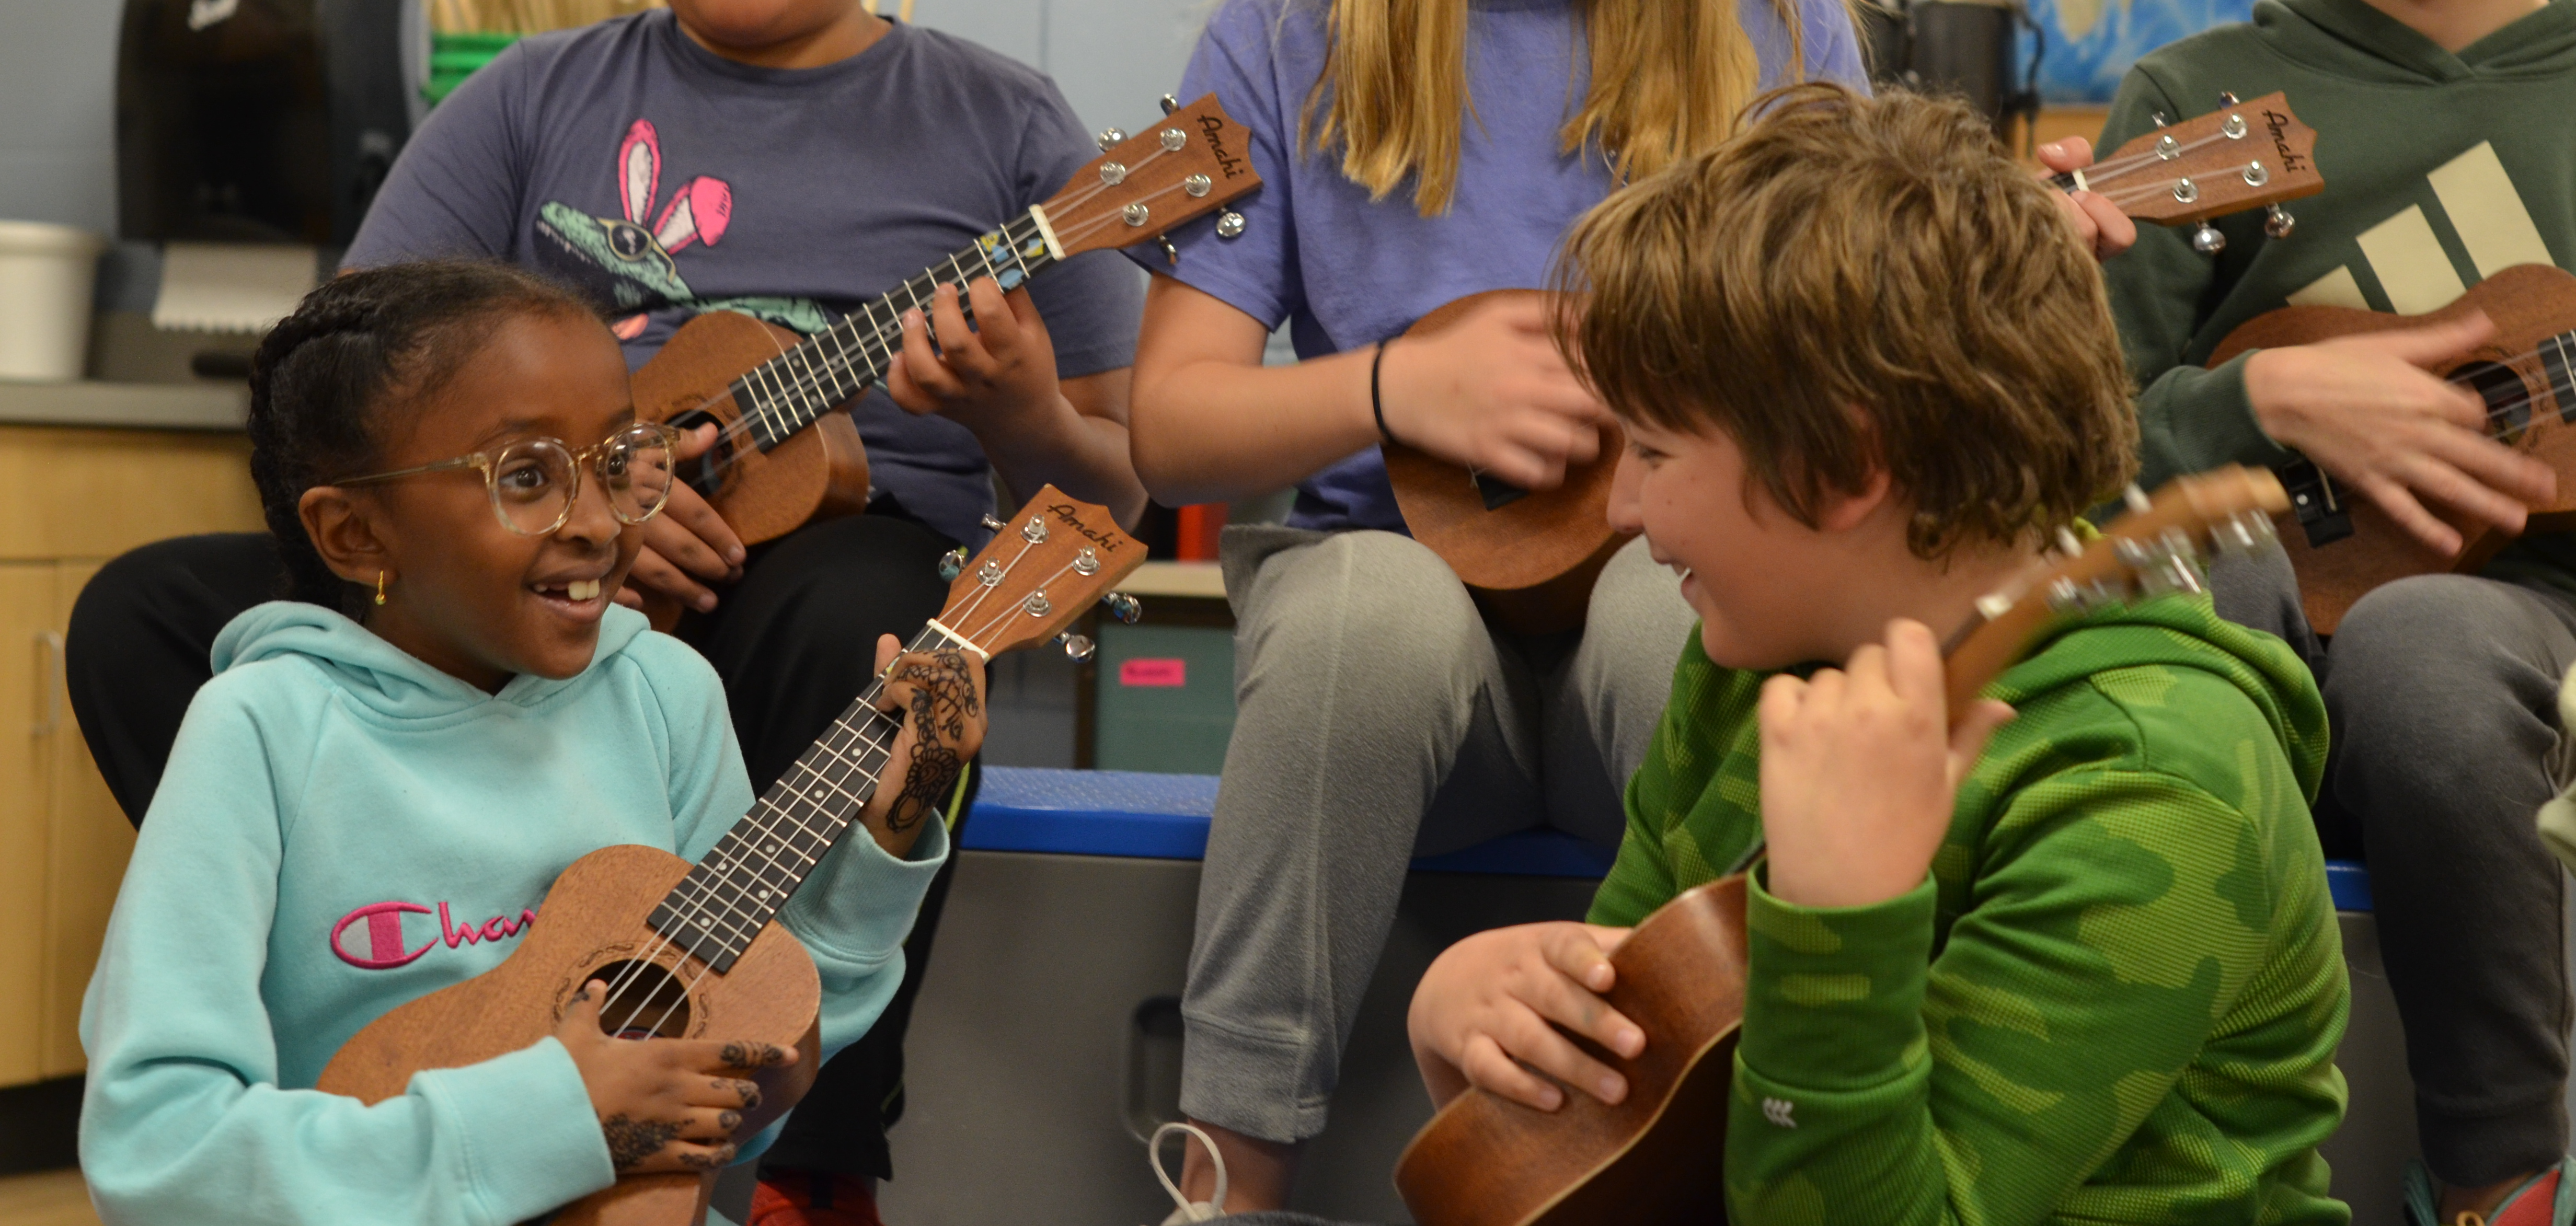 Students playing the ukulele in music class while singing.